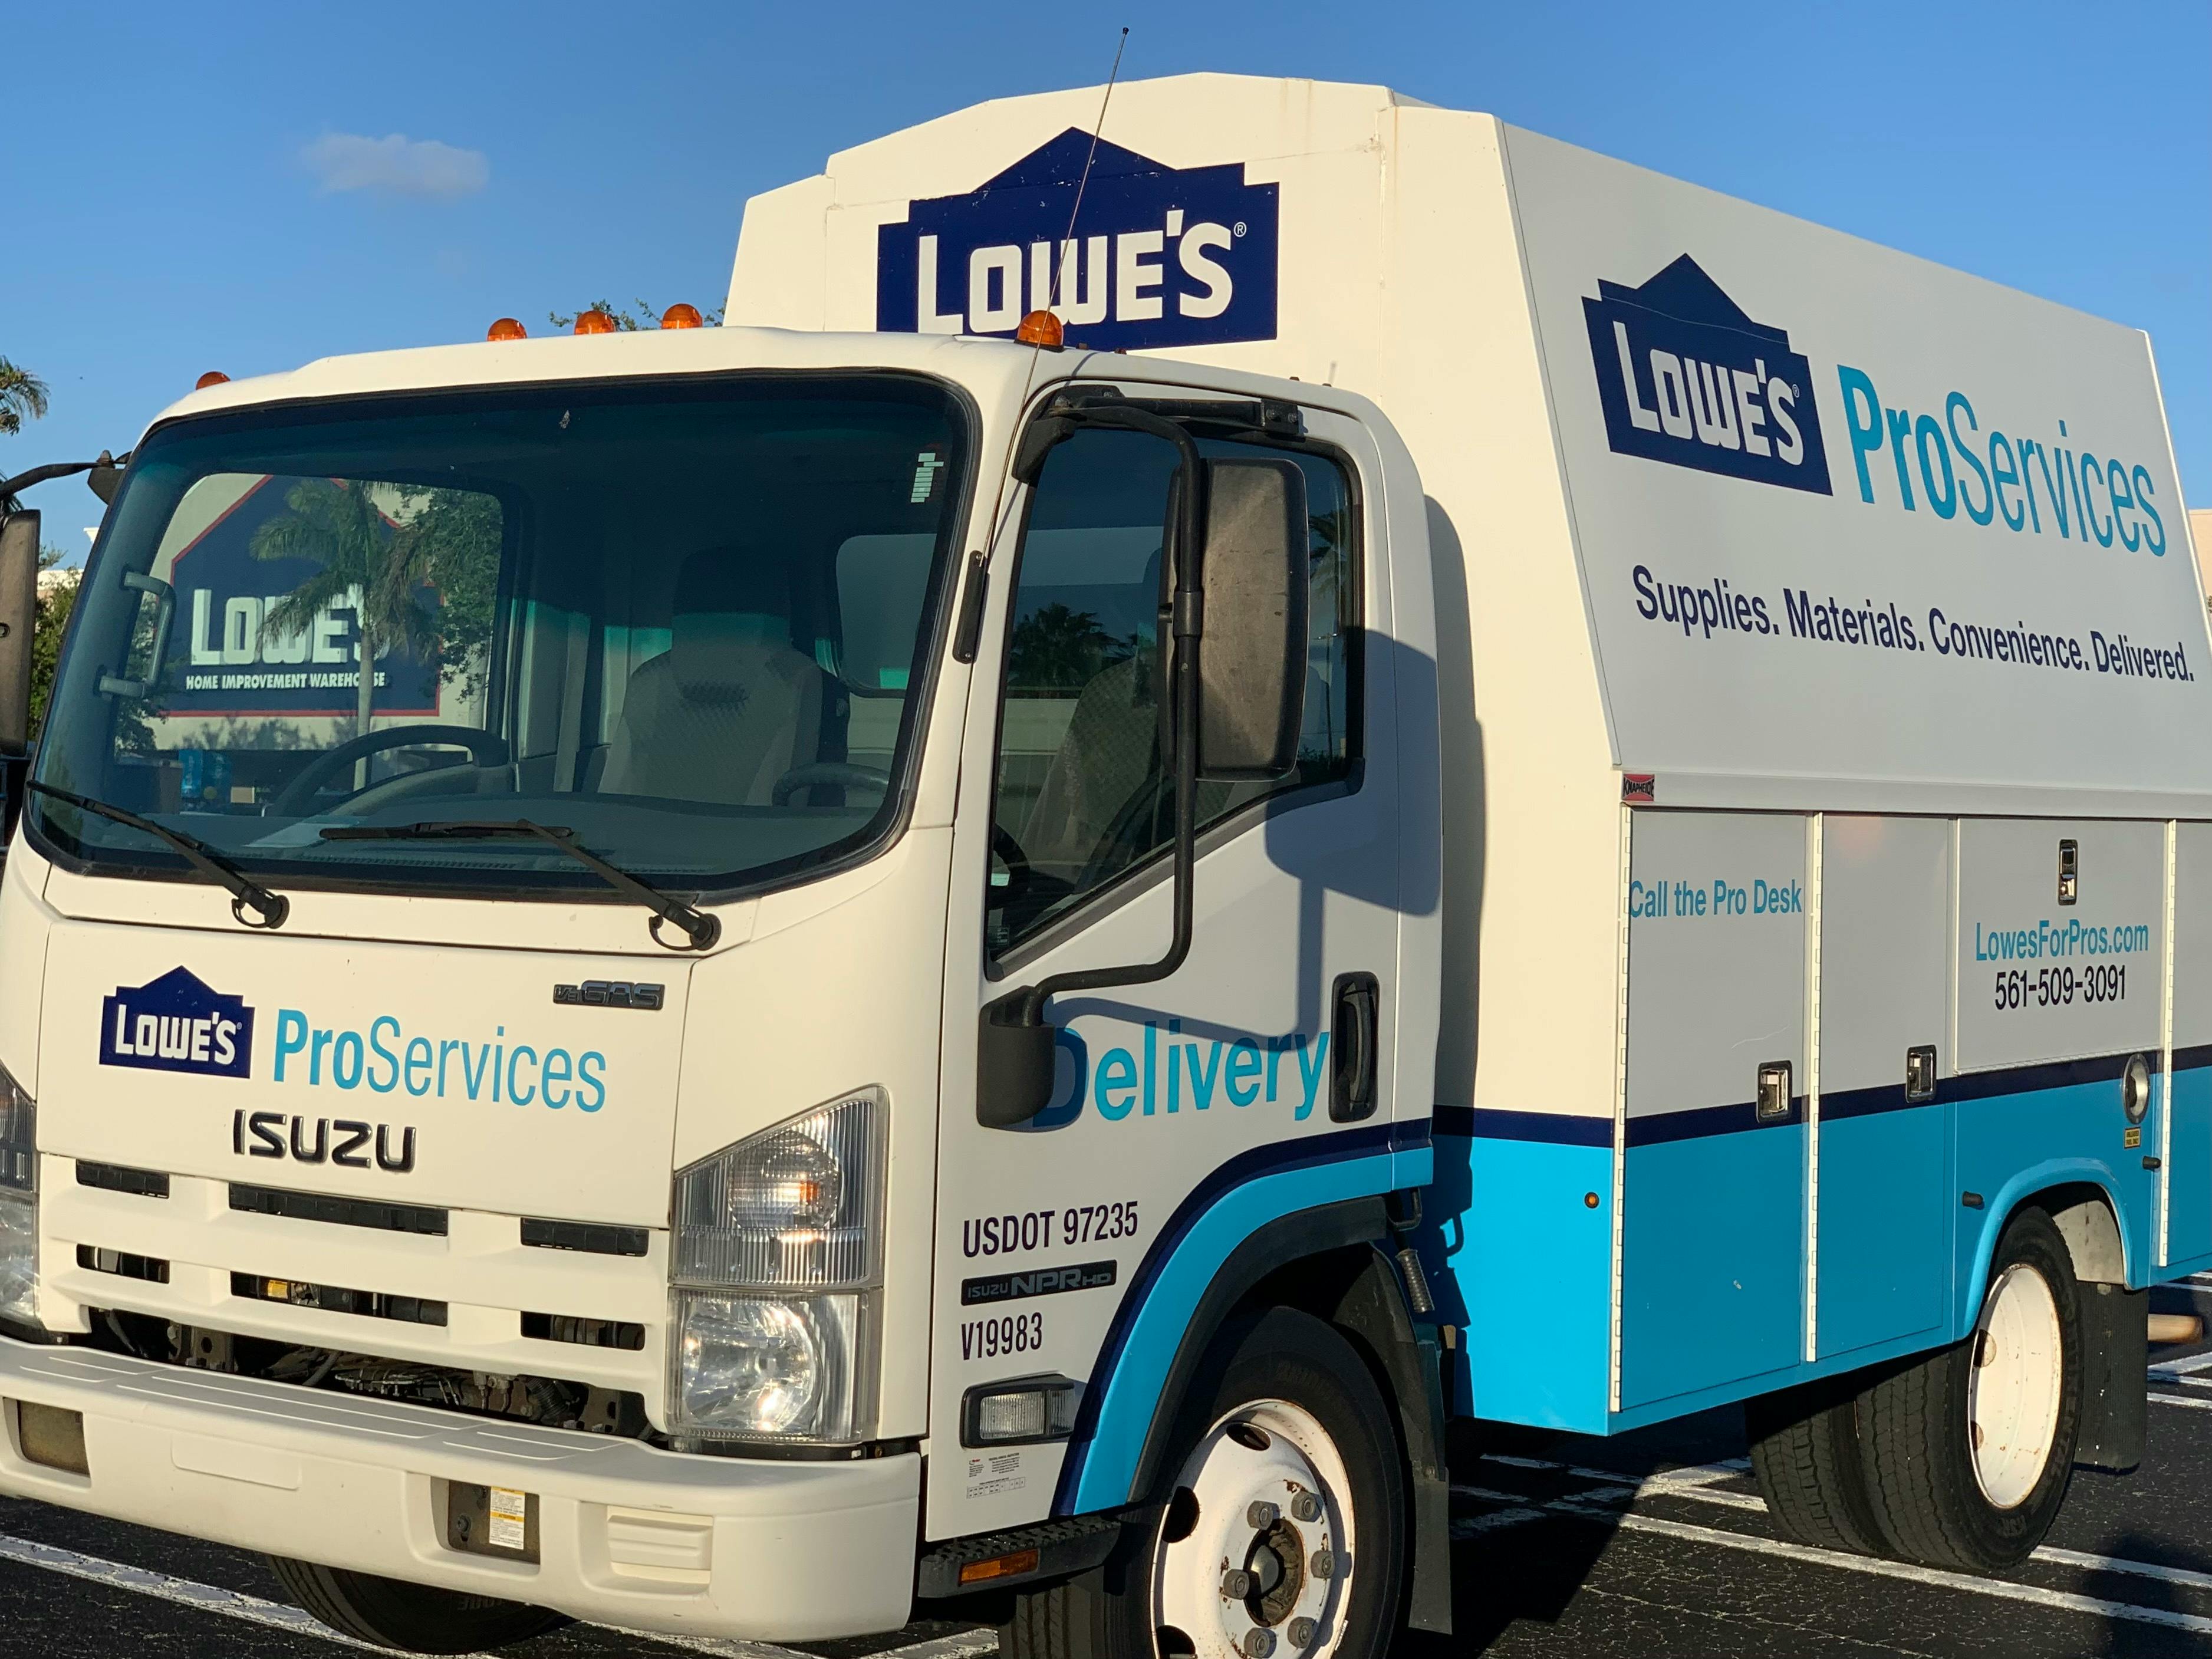 lowes proservices truck